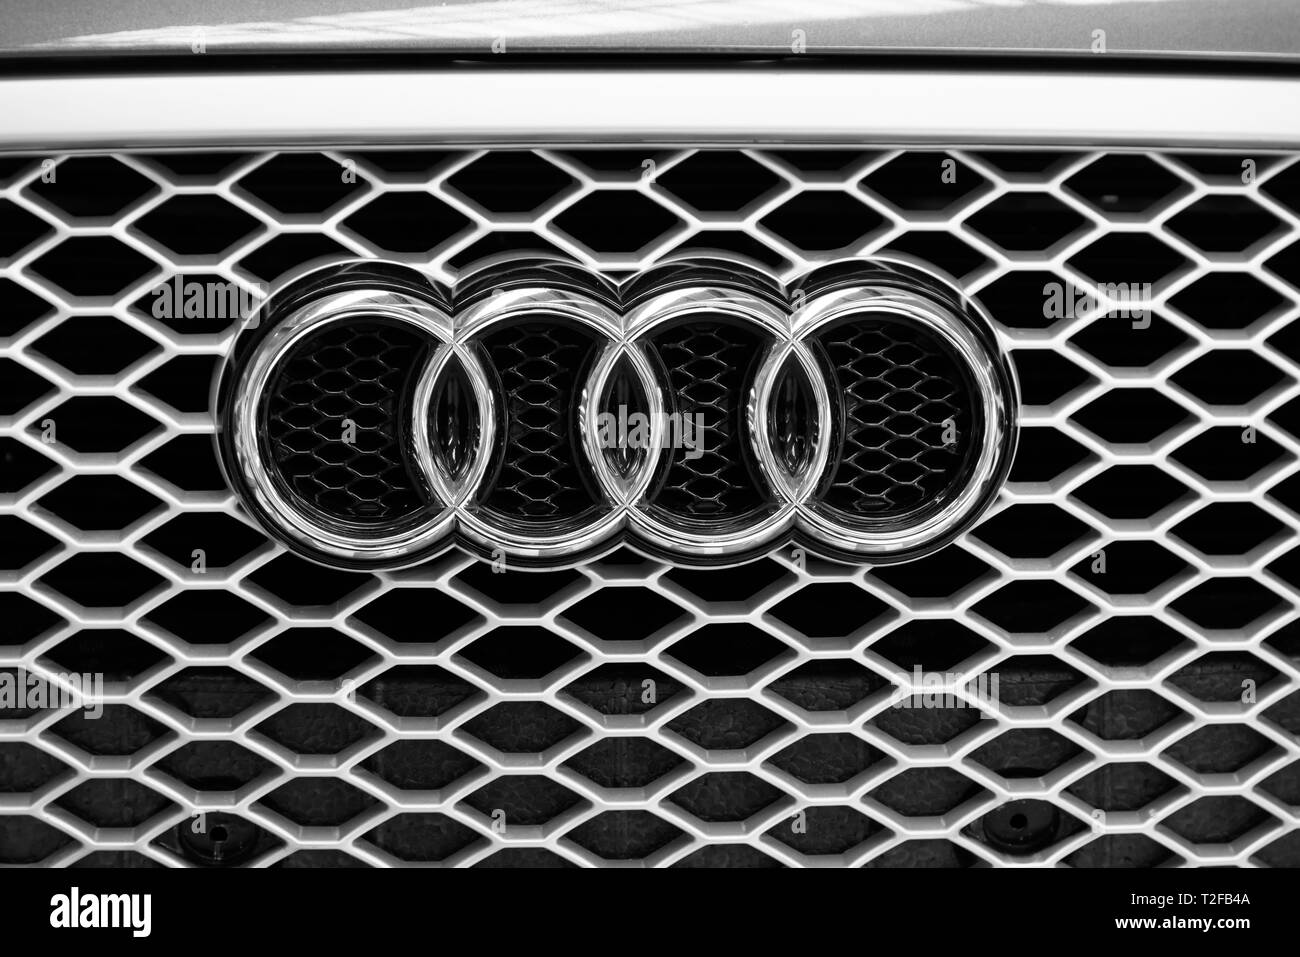 BUCHAREST, ROMANIA - OCTOBER 21, 2016: Founded in 1910 Audi is a German automobile manufacturer Stock Photo